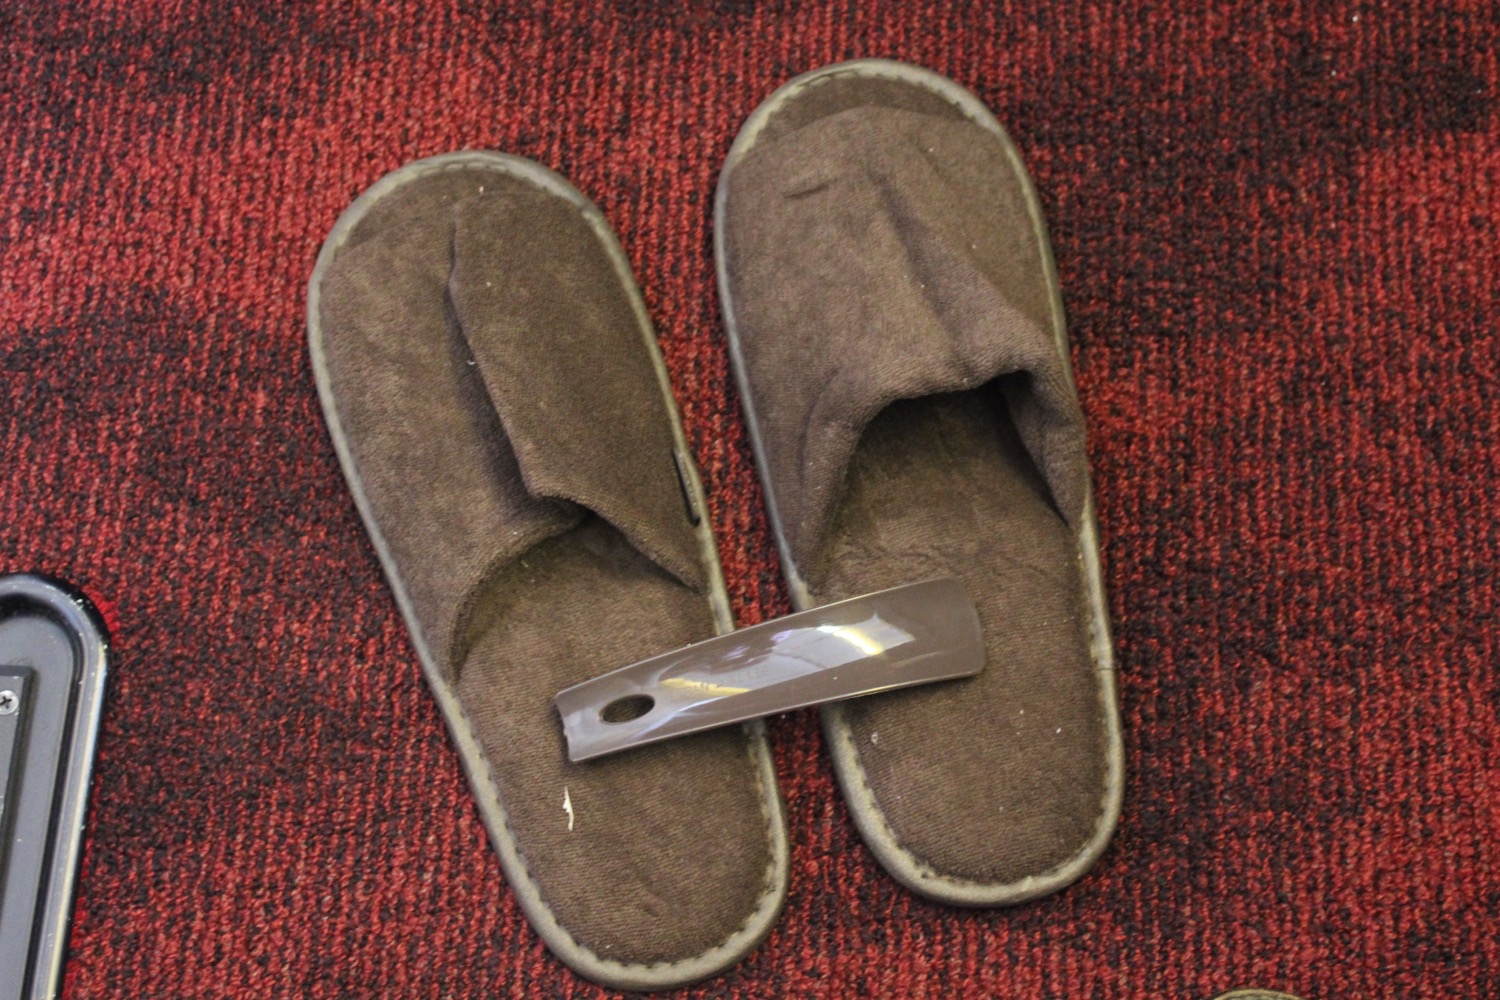 a pair of slippers on a red carpet